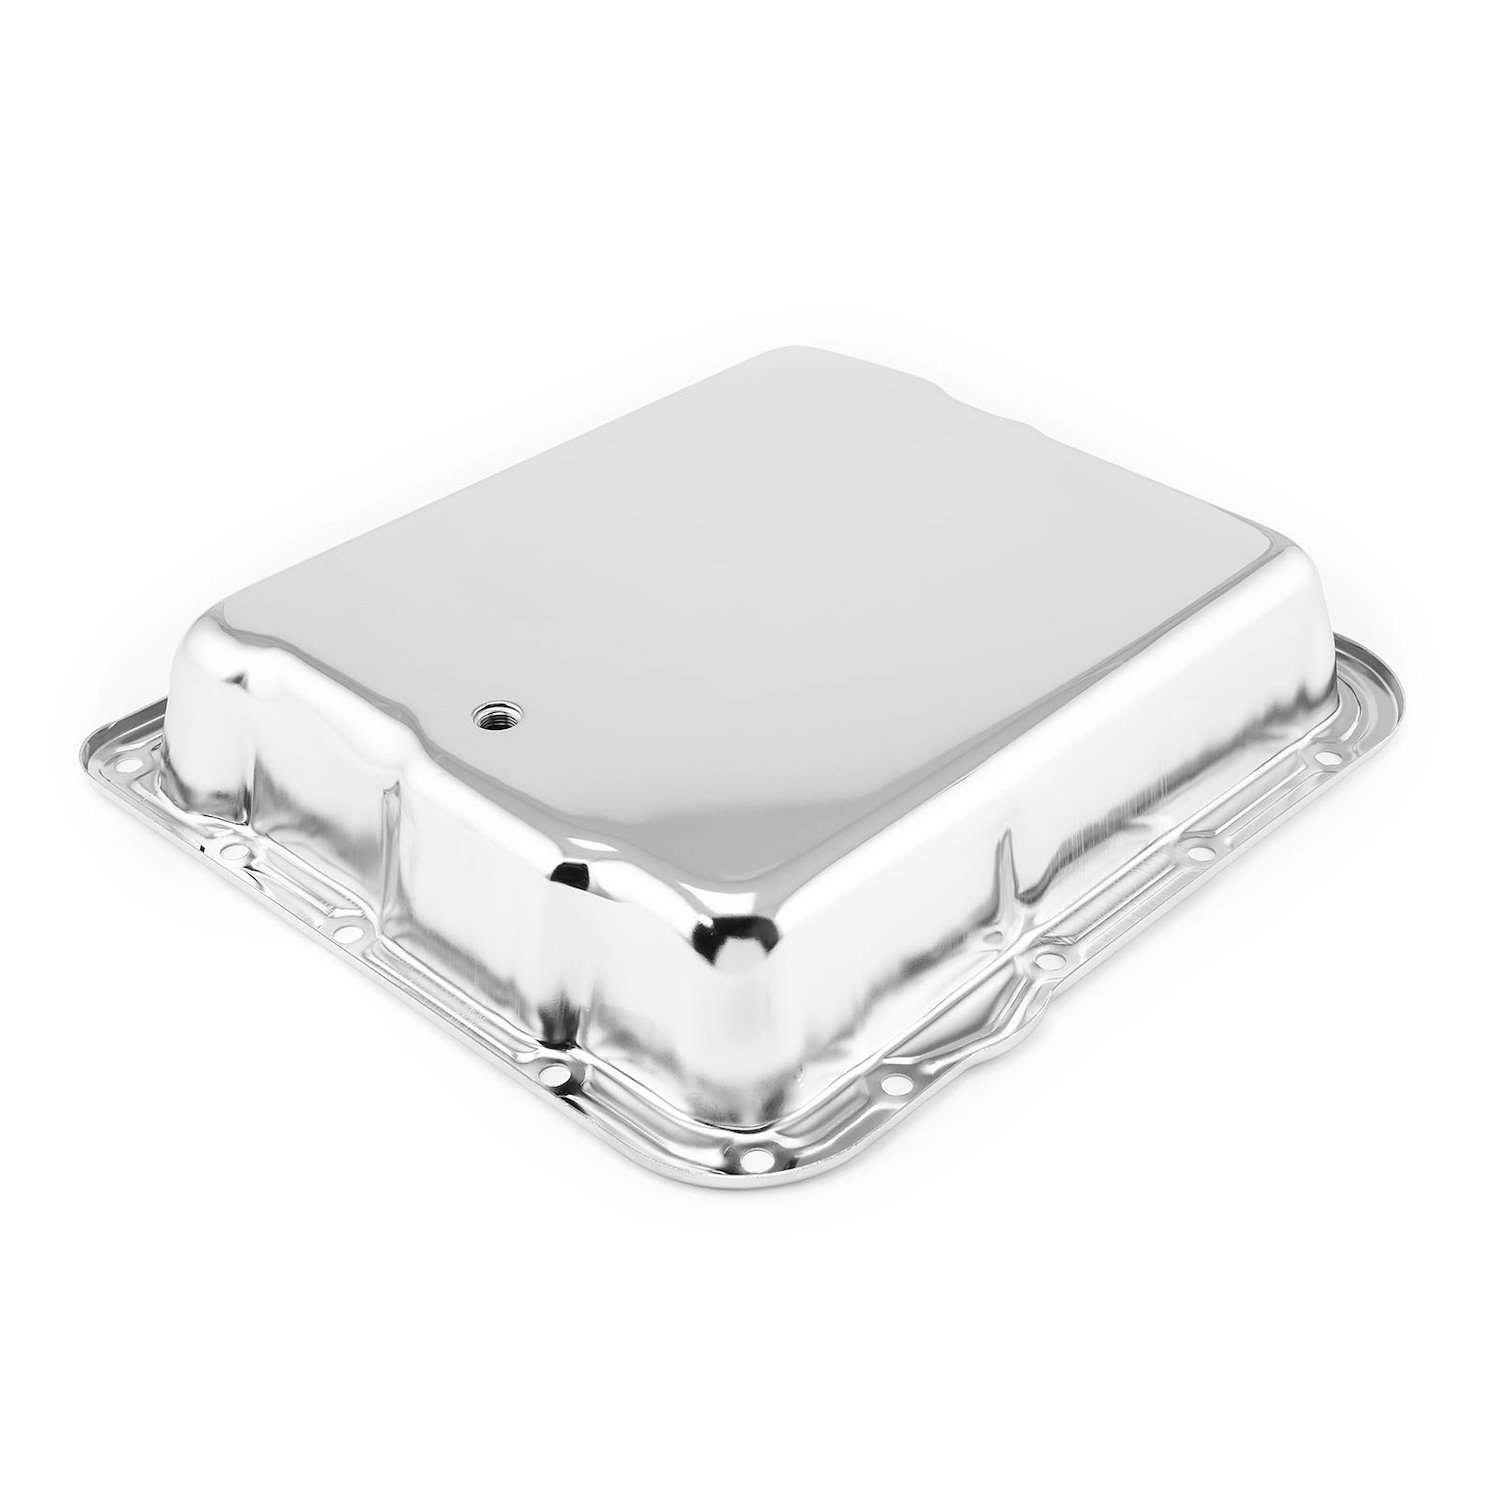 TURBO 700R4 DEEP TRANSMISSION OIL PAN CHROME WITH